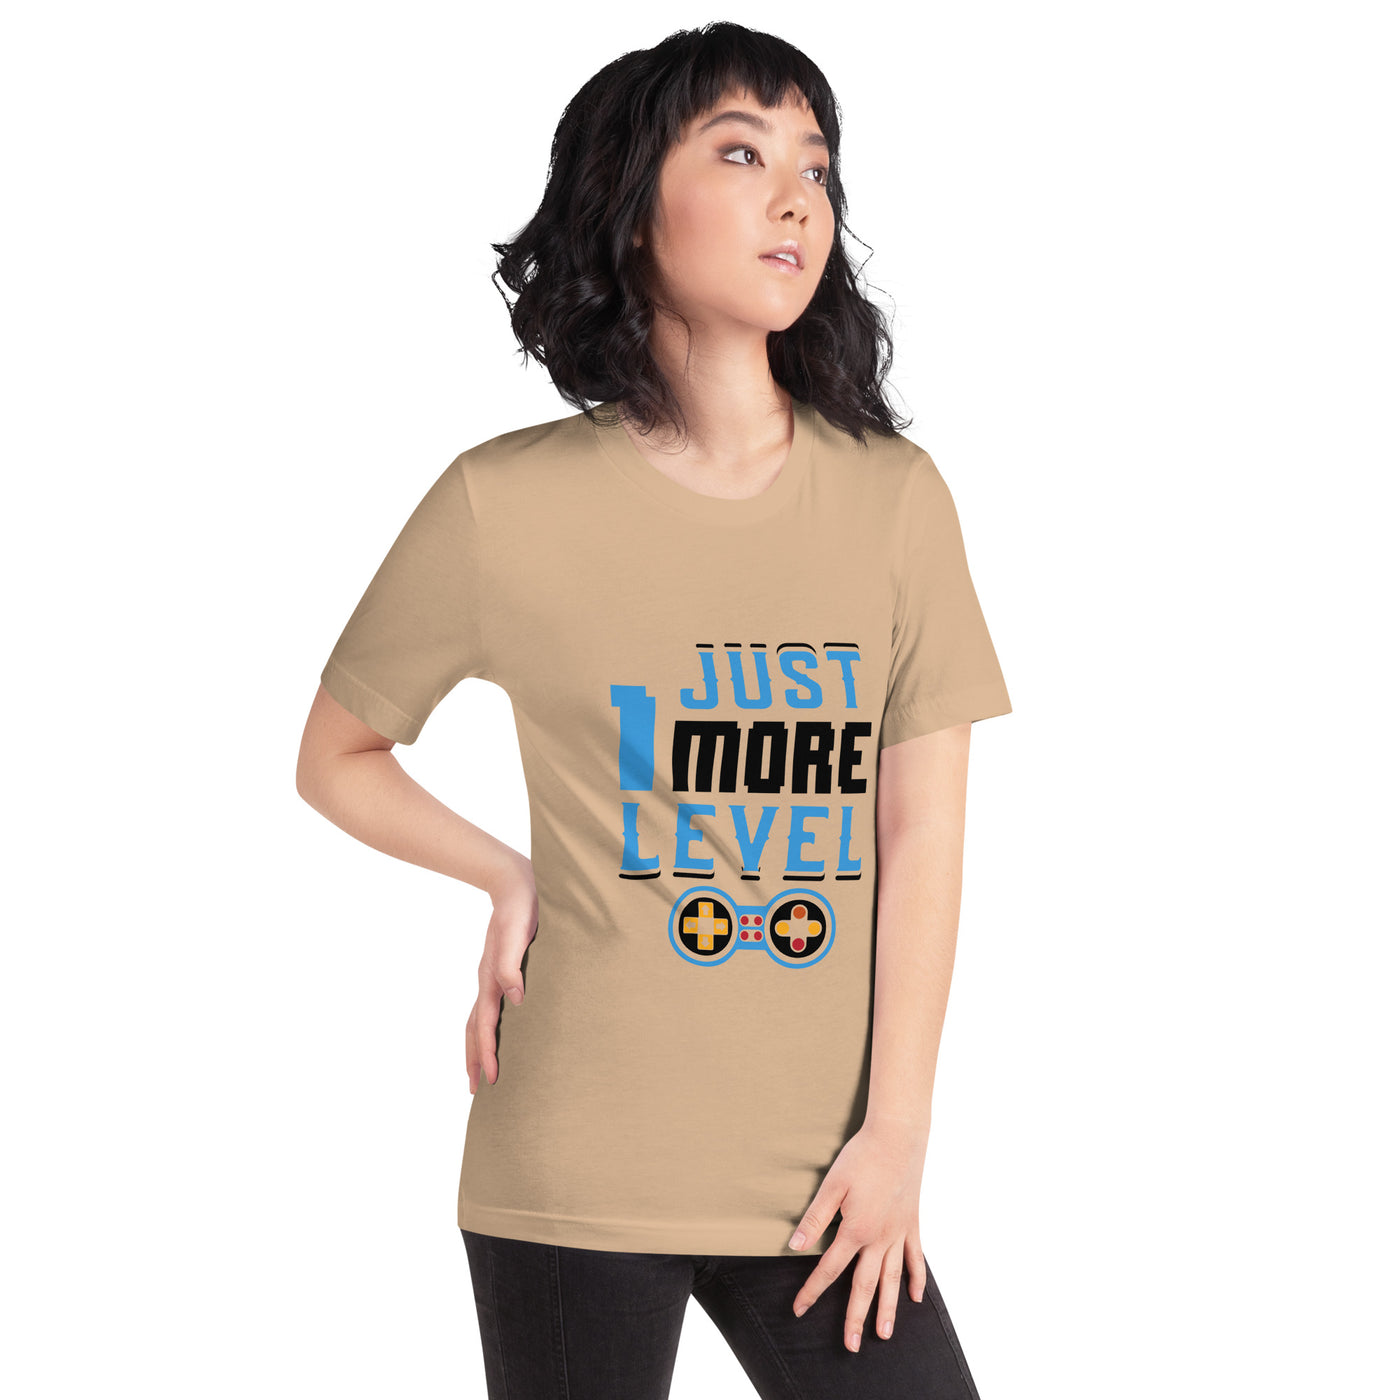 Just 1 More Level in Dark Text - Unisex t-shirt